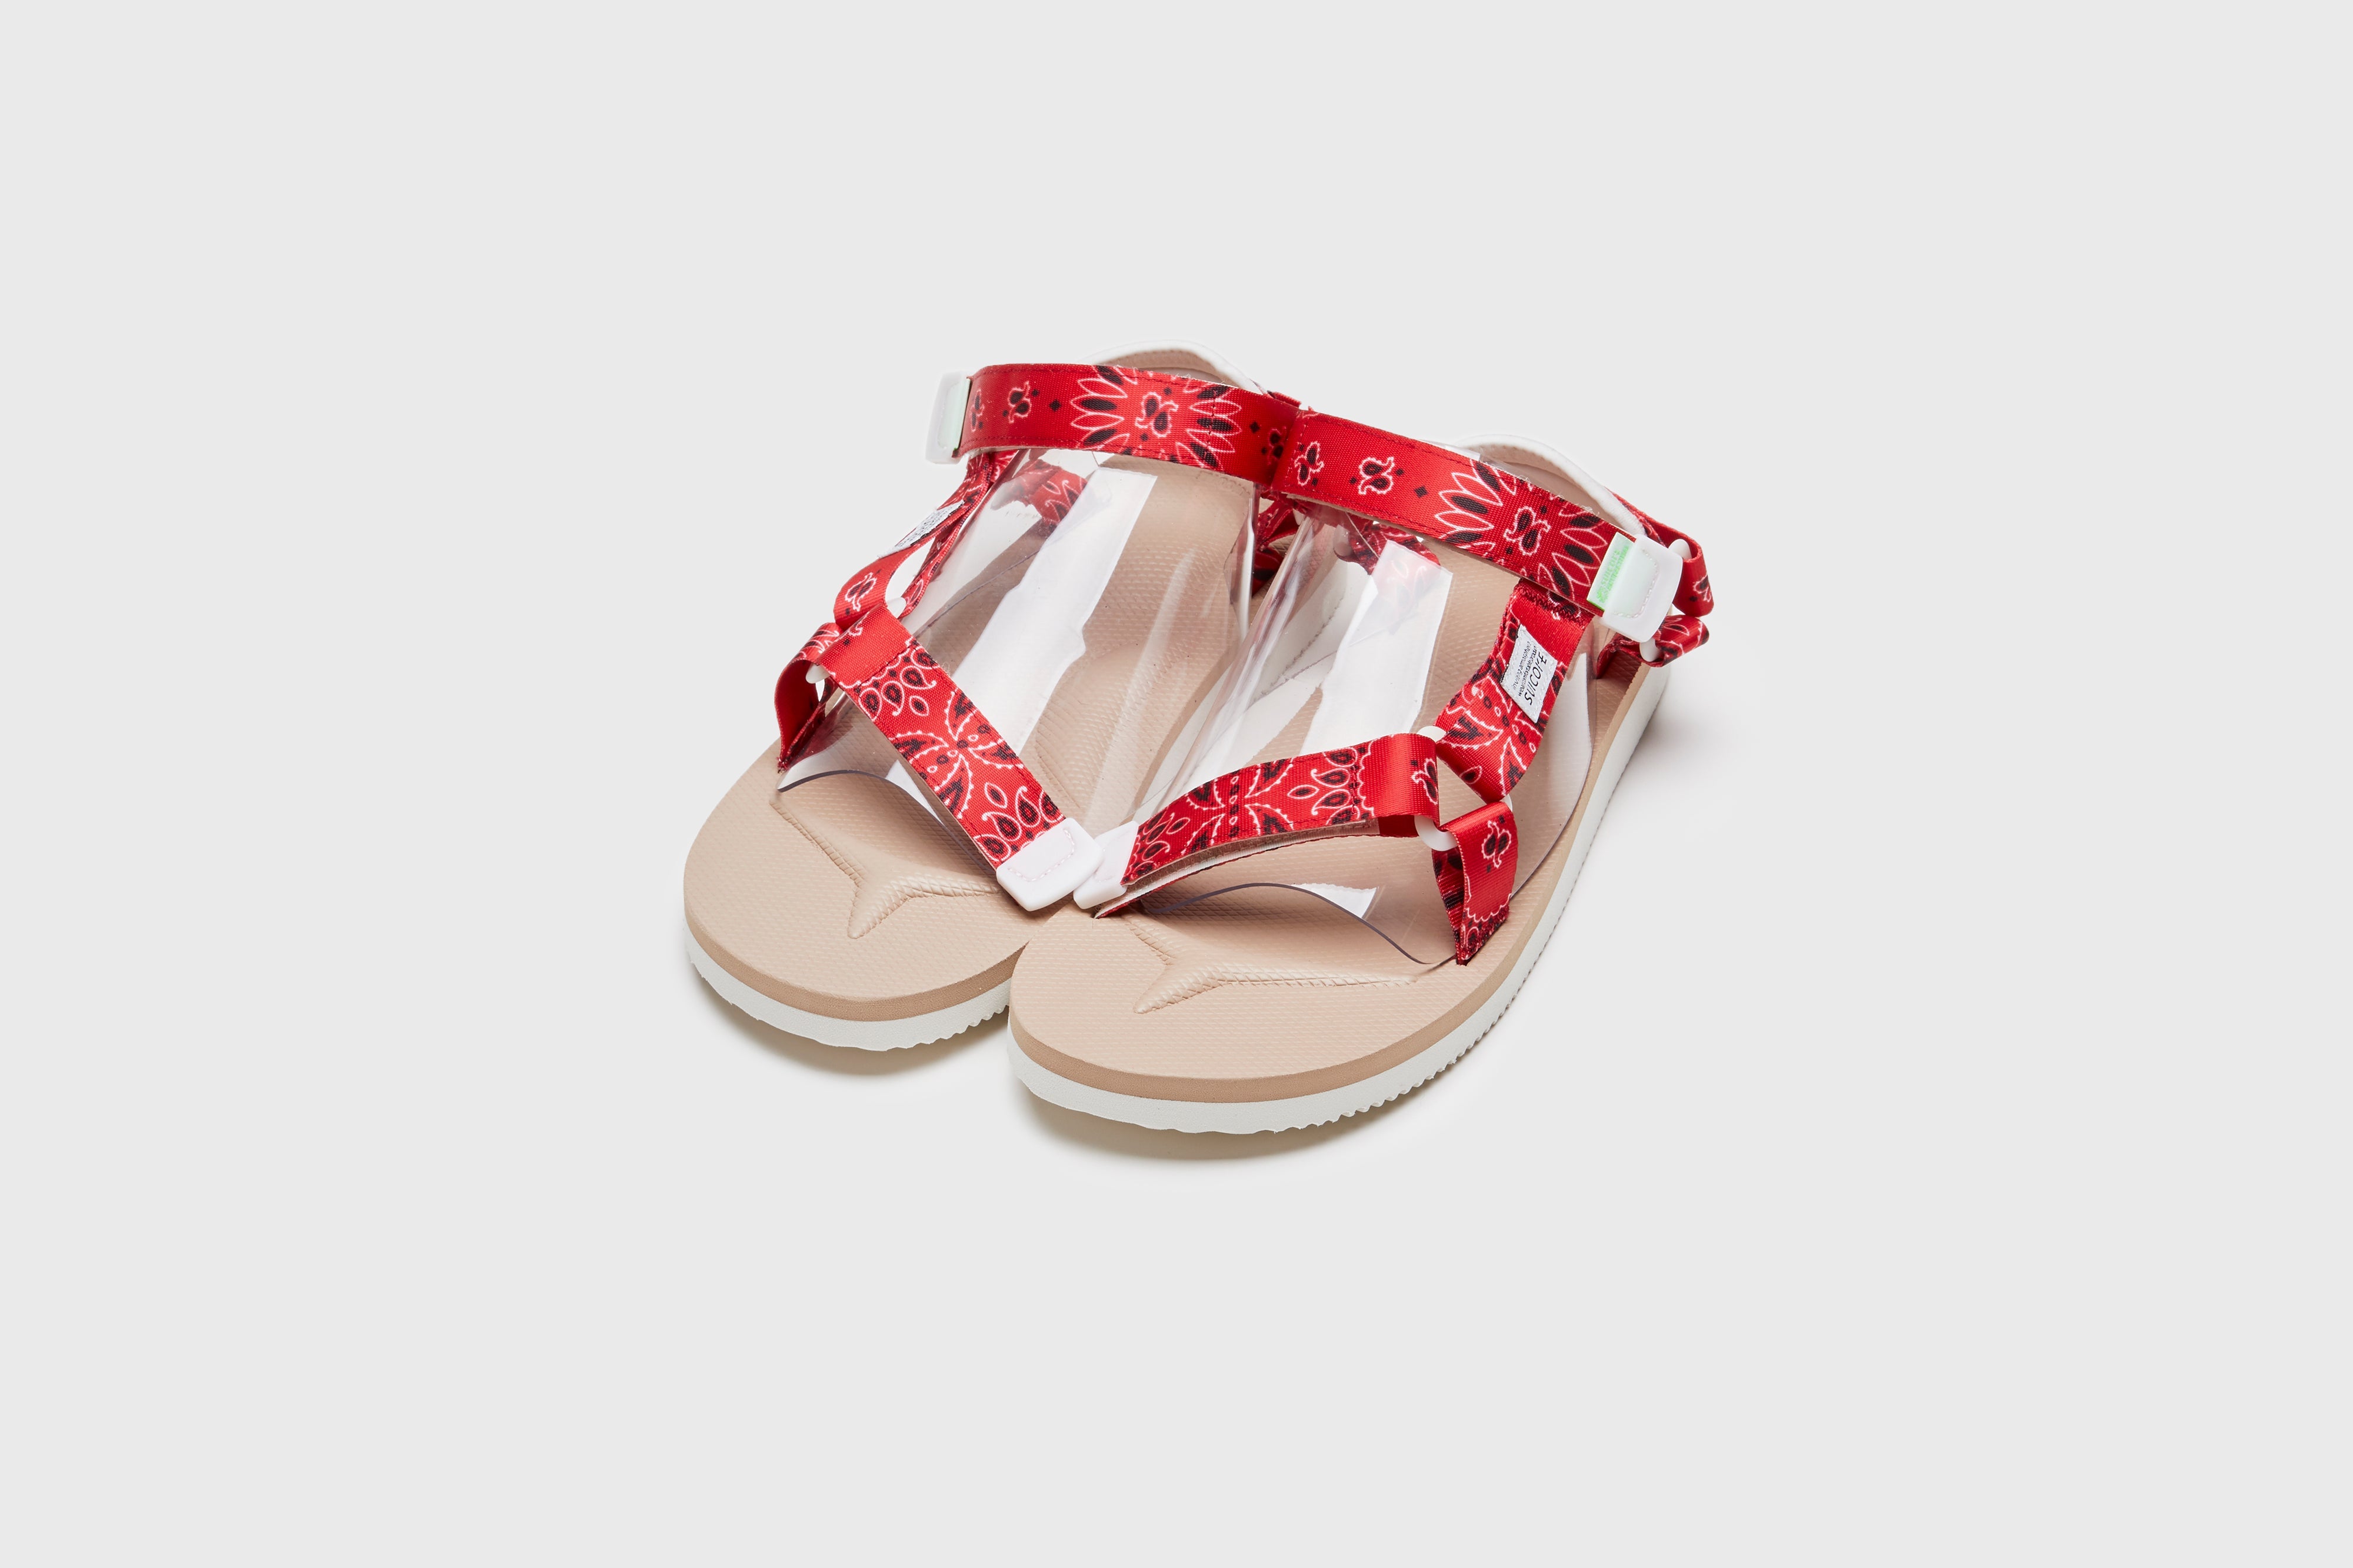 SUICOKE DEPA-Cab-PT05 sandals with red &amp; beige nylon upper, red &amp; beige midsole and sole, strap and logo patch. From Spring/Summer 2023 collection on eightywingold Web Store, an official partner of SUICOKE. OG-022CAB-PT05 RED X BEIGE